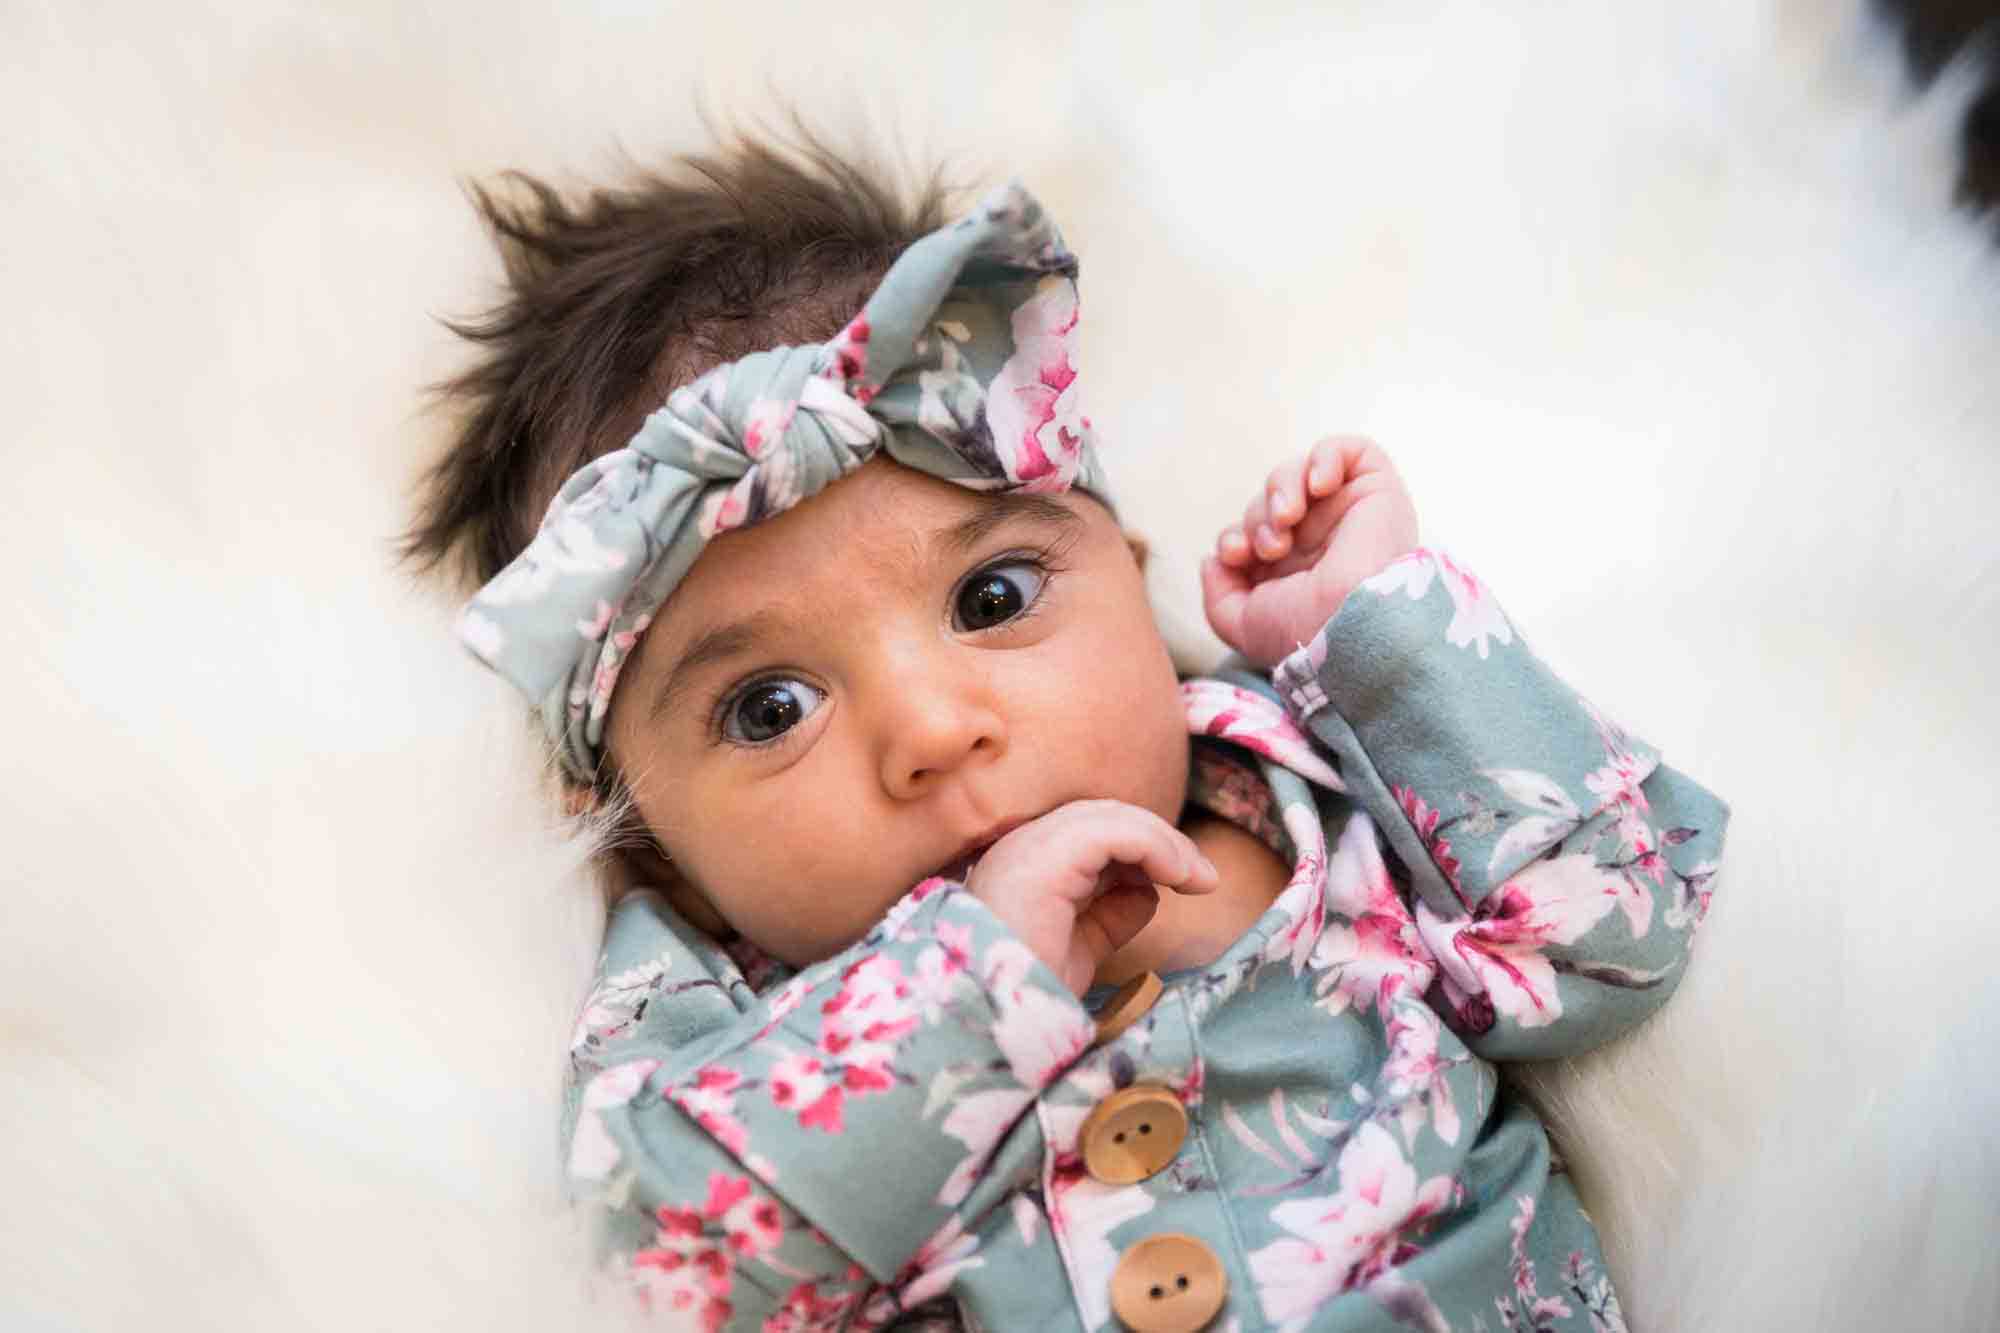 Newborn baby wearing floral dress and headband during a Christmas-themed newborn photo shoot in NYC